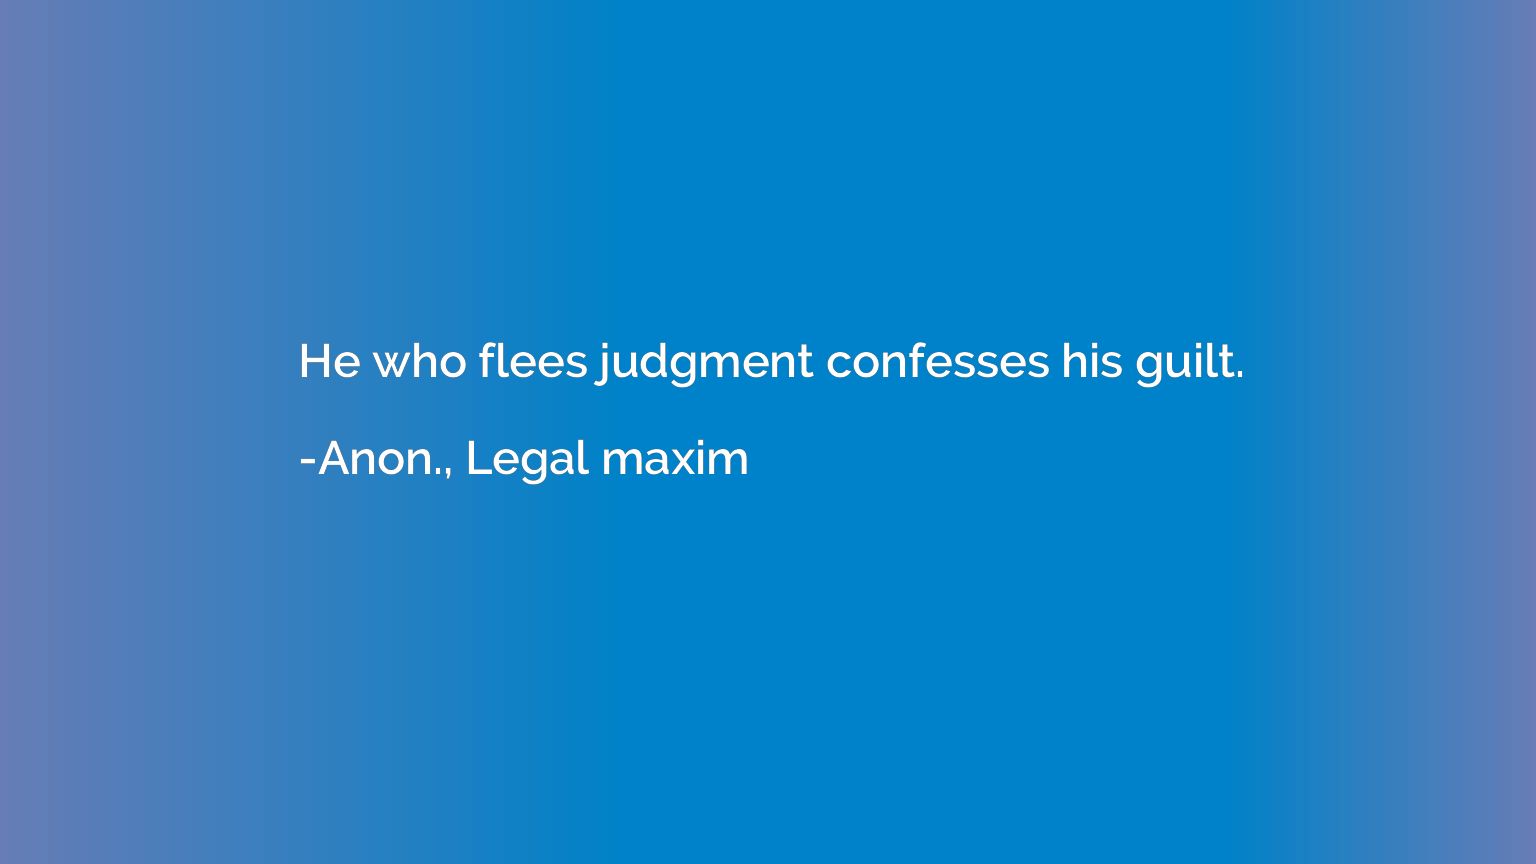 He who flees judgment confesses his guilt.